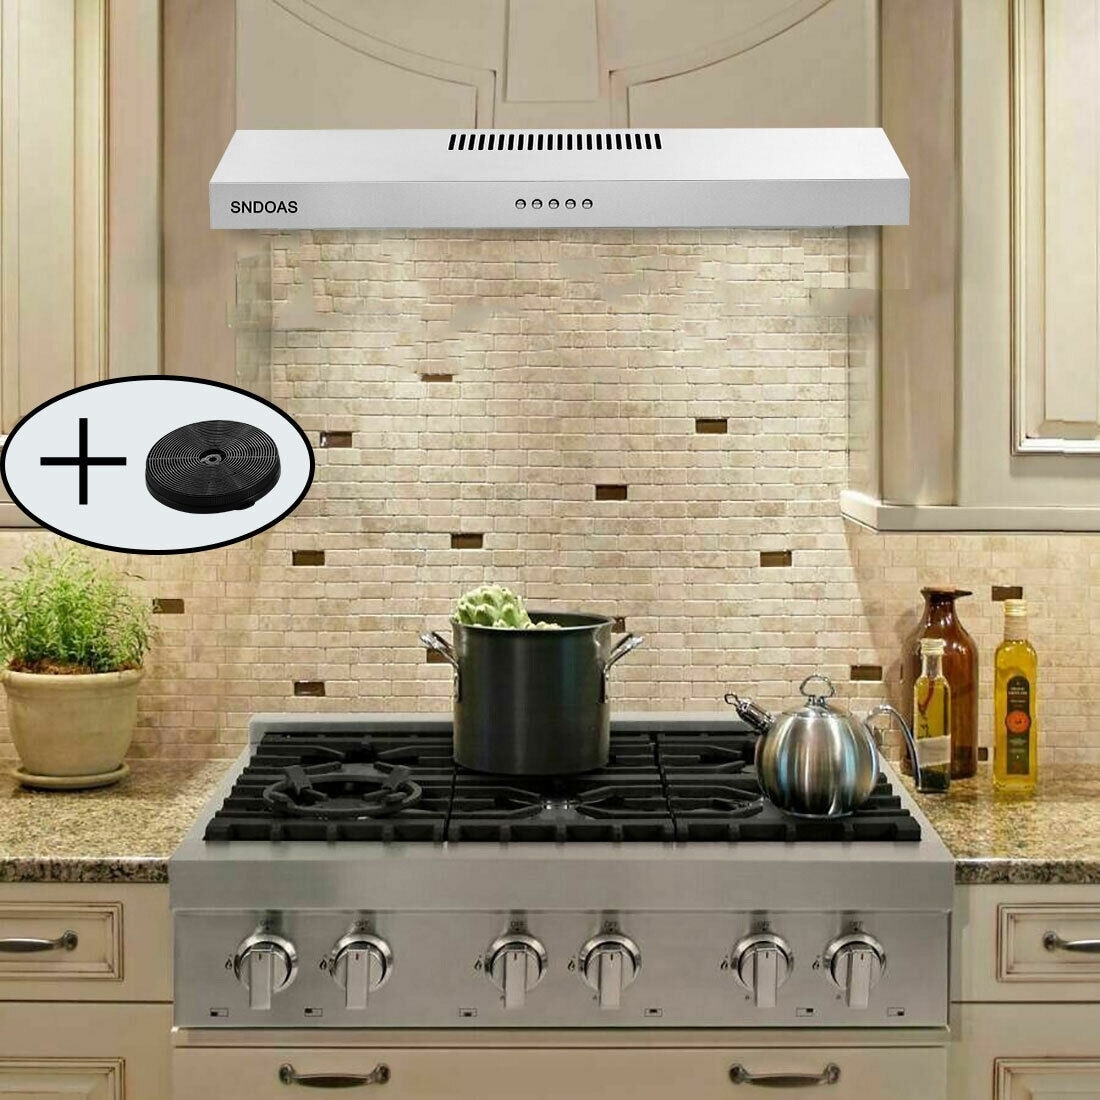 Tieasy Range Hood 30 inch 230 CFM Under Cabinet, Ducted/Ductless White+Grease Filter(Ductless)